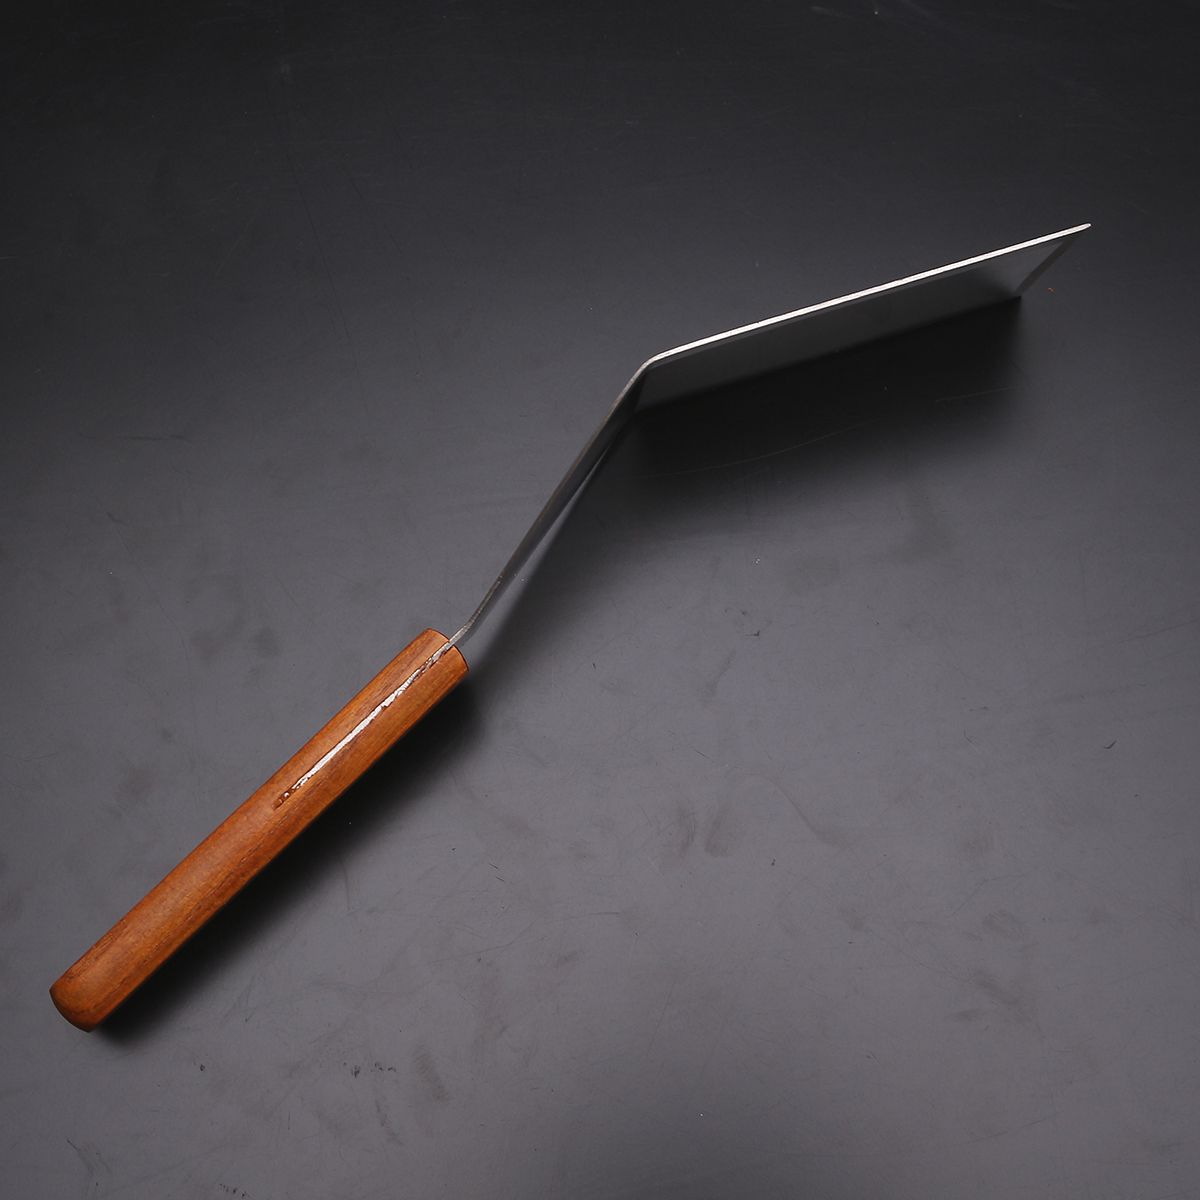 29times7times15cm-Stainless-Steel-Spatula-Scrapers-Pancake-Shovel-Turner-Scoop-With-Wooden-Handle-1341082